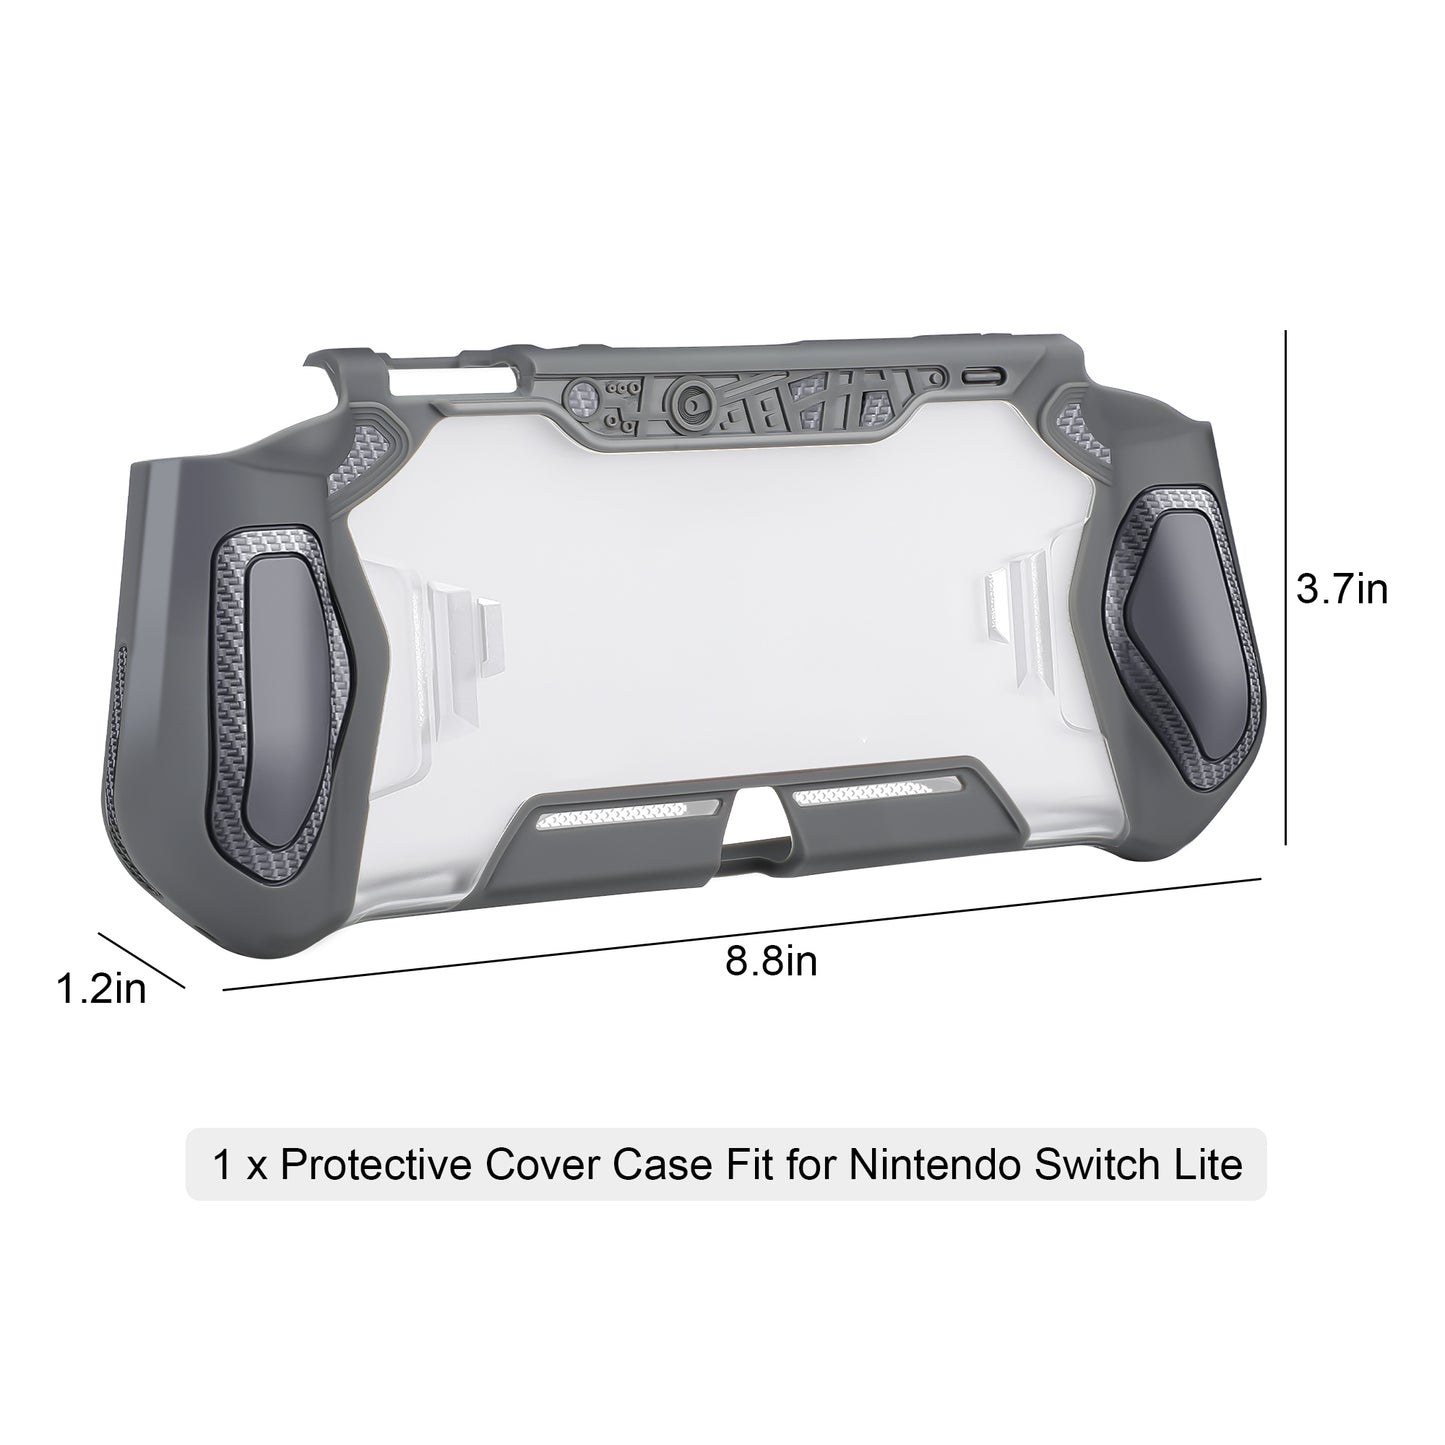 TPU Protective Cover Case Fit for Nintendo Switch Lite - Shockproof Grip Handle Hard Shell with Ergonomic Grip, Shockproof Anti-Scratch (Gray)